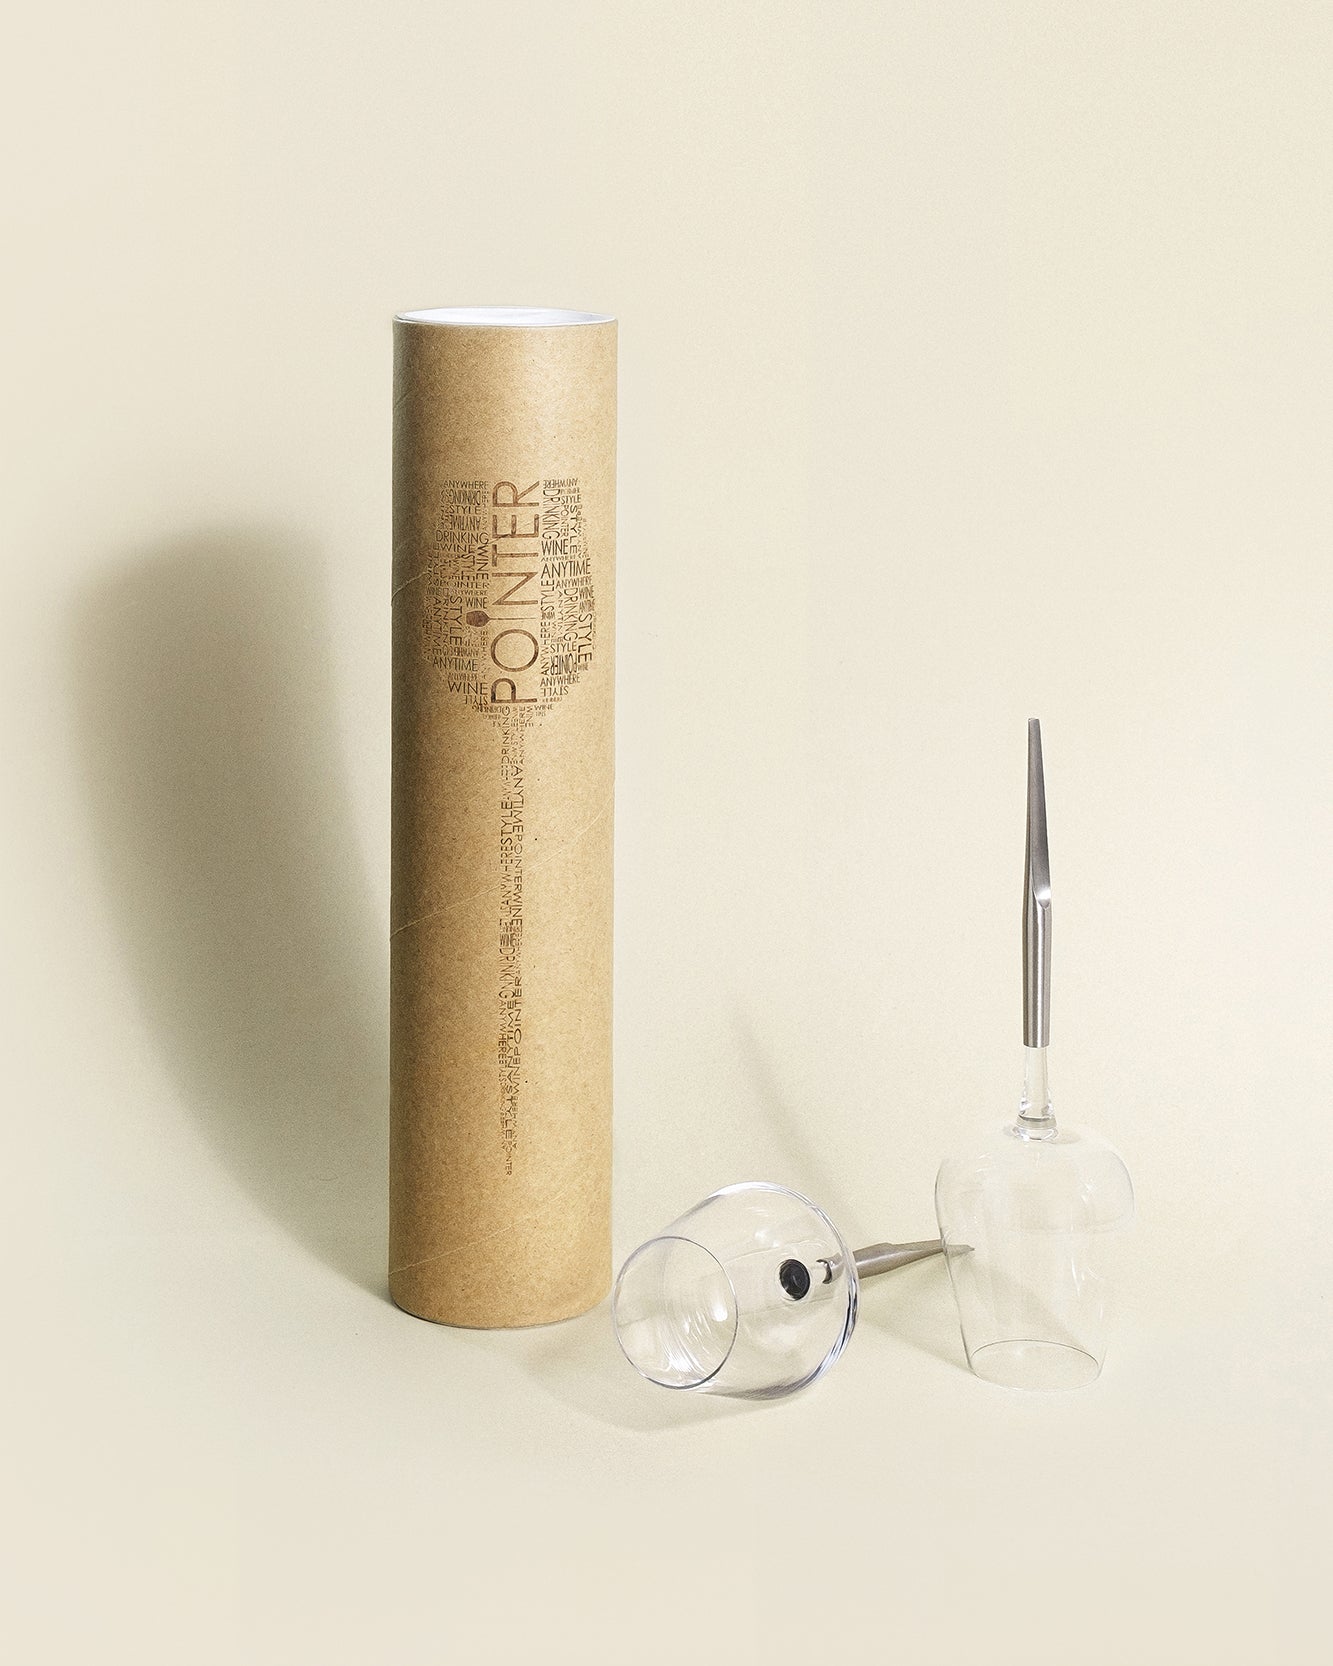 2 picnic wine glasses with metal pin, placed next to their cardboard packing tube for transport, one upside down, one horizontally